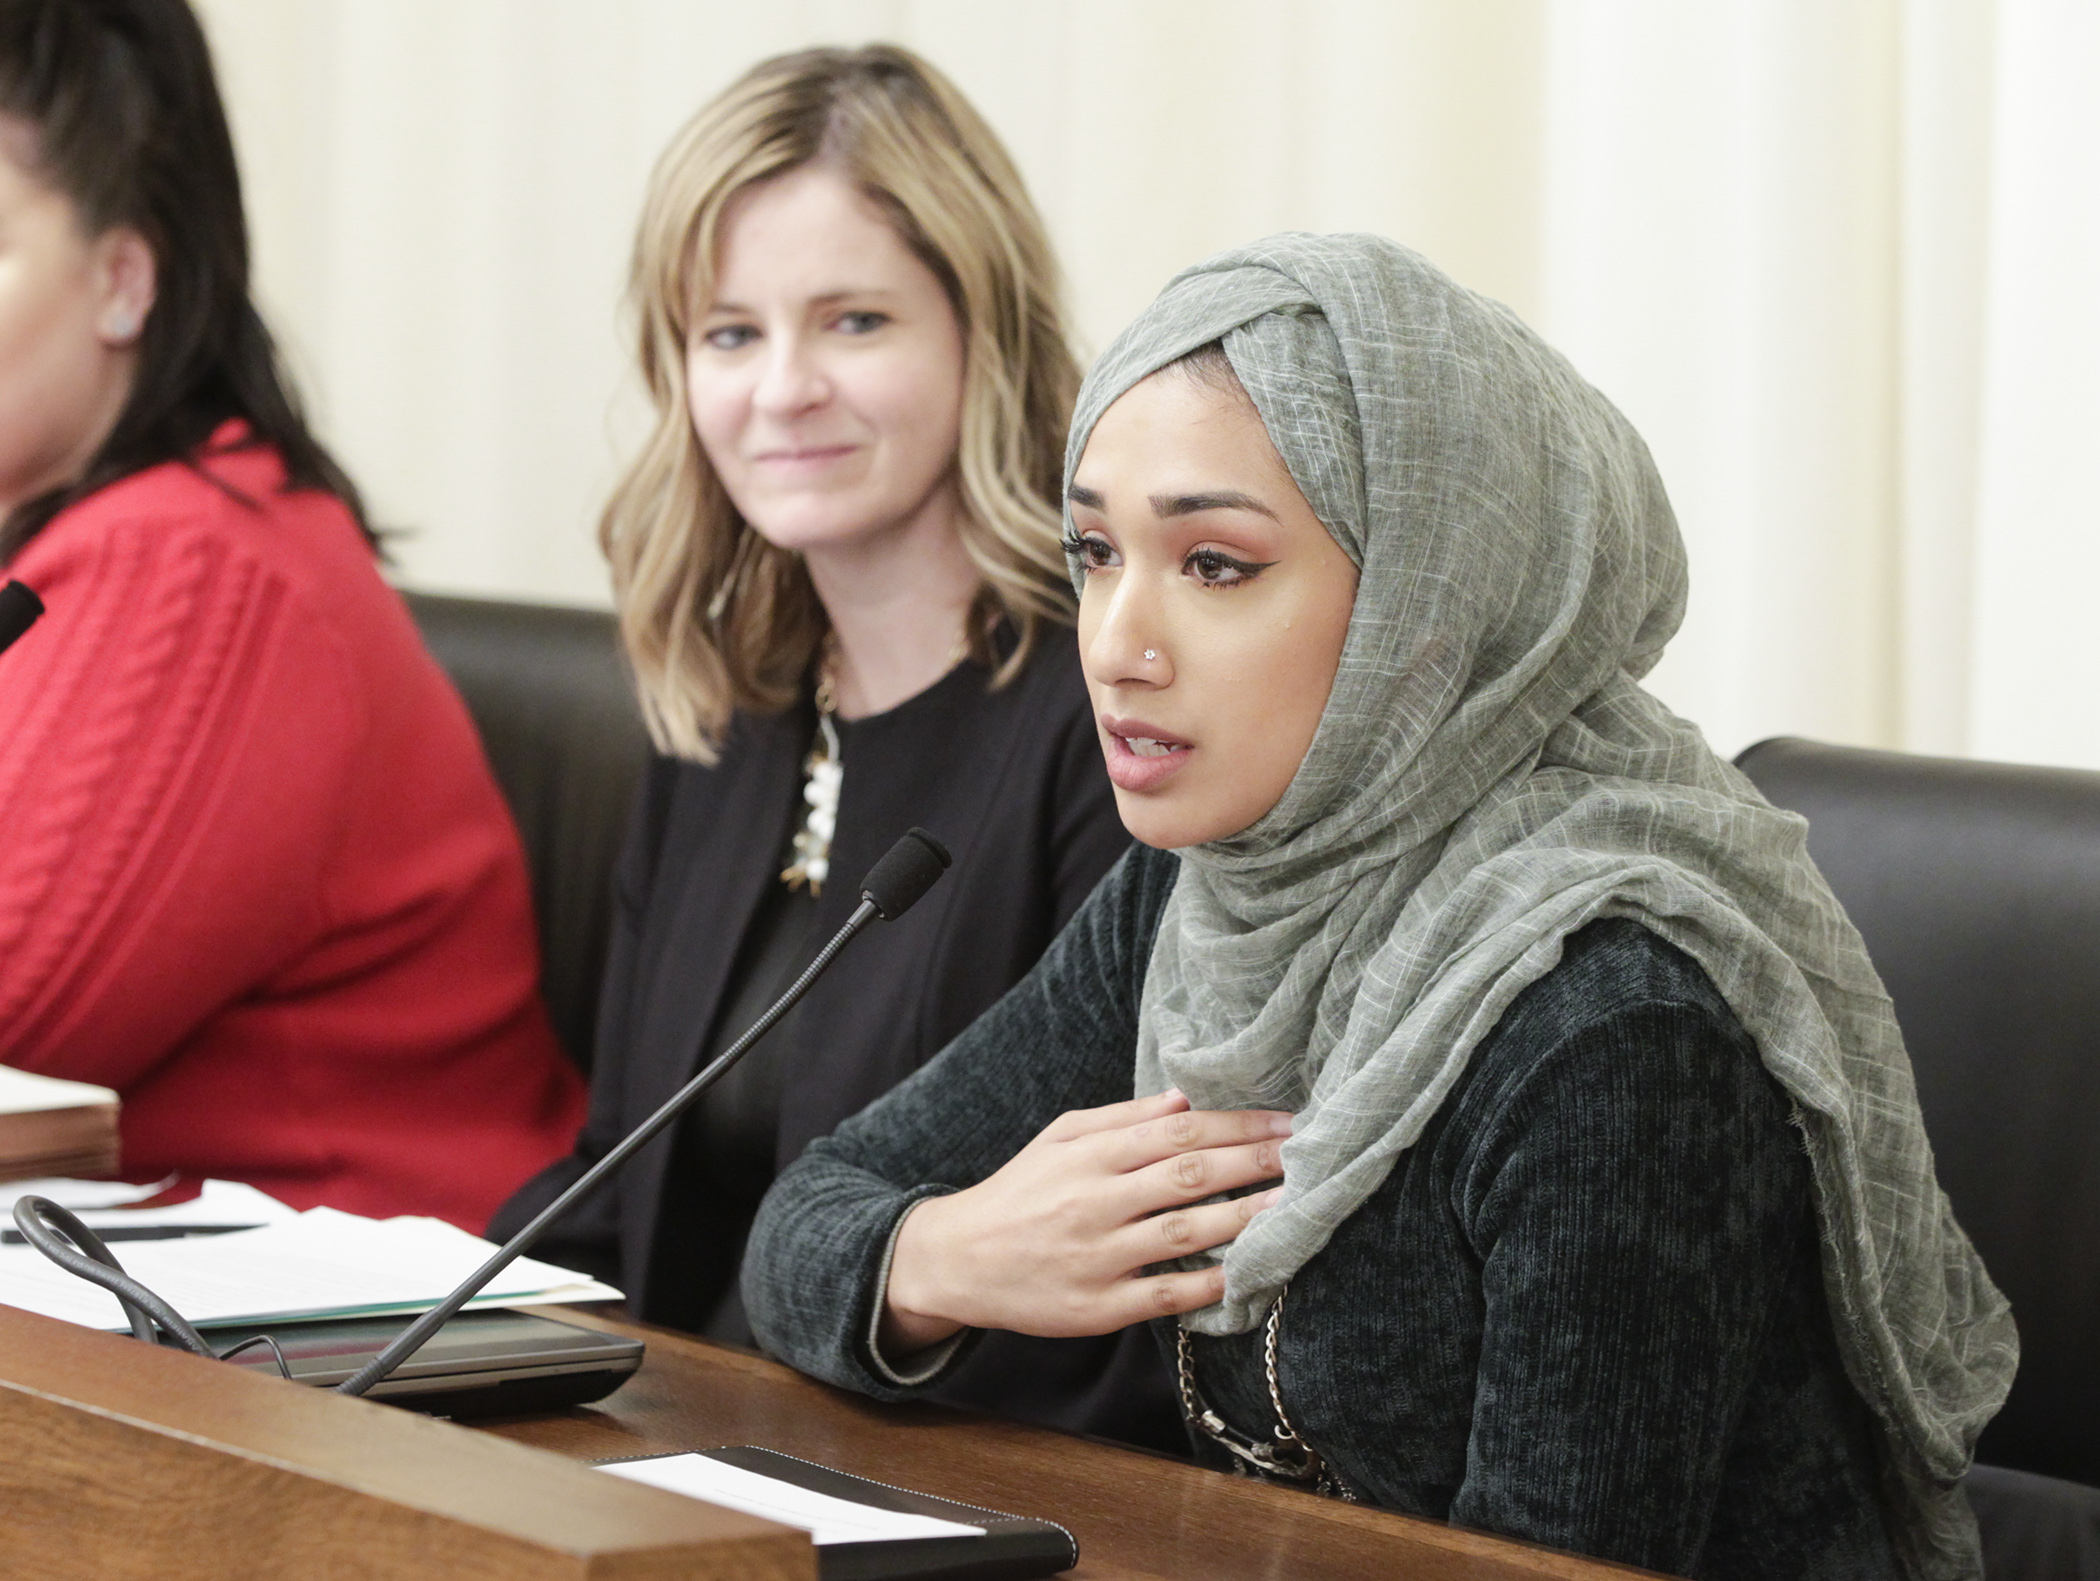 Asma Mohammed of Reviving the Islamic Sisterhood for Empowerment testifies Jan. 31 in the House public safety division on a bill to create a working group to recommend statutory changes to the state’s criminal sexual conduct laws. Photo by Paul Battaglia